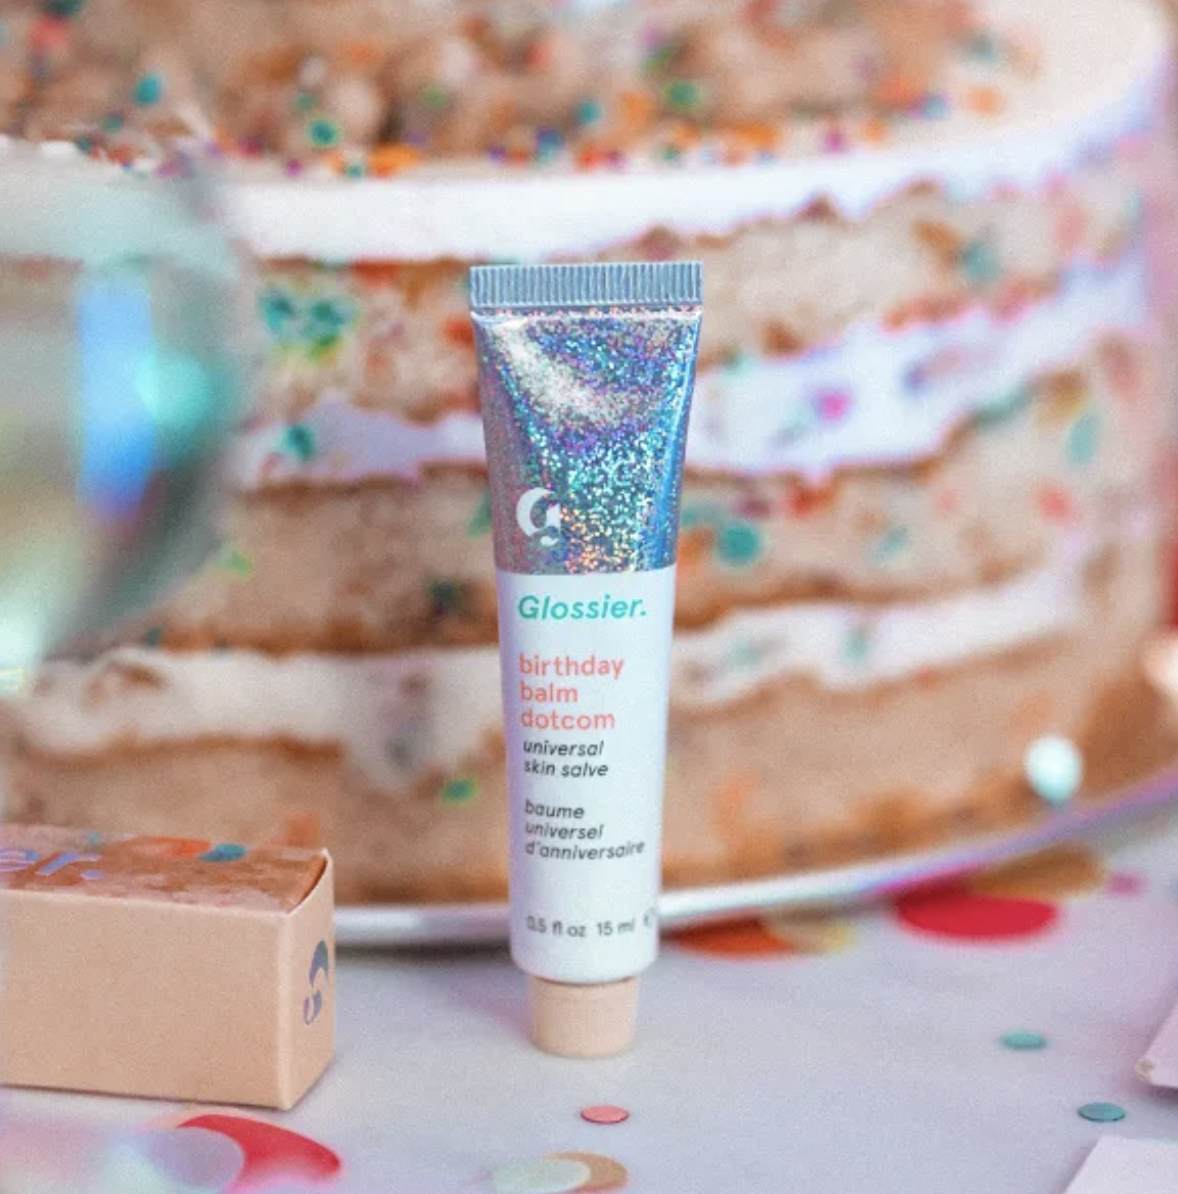 A shimmery tube of lip balm posed in front of a cake 